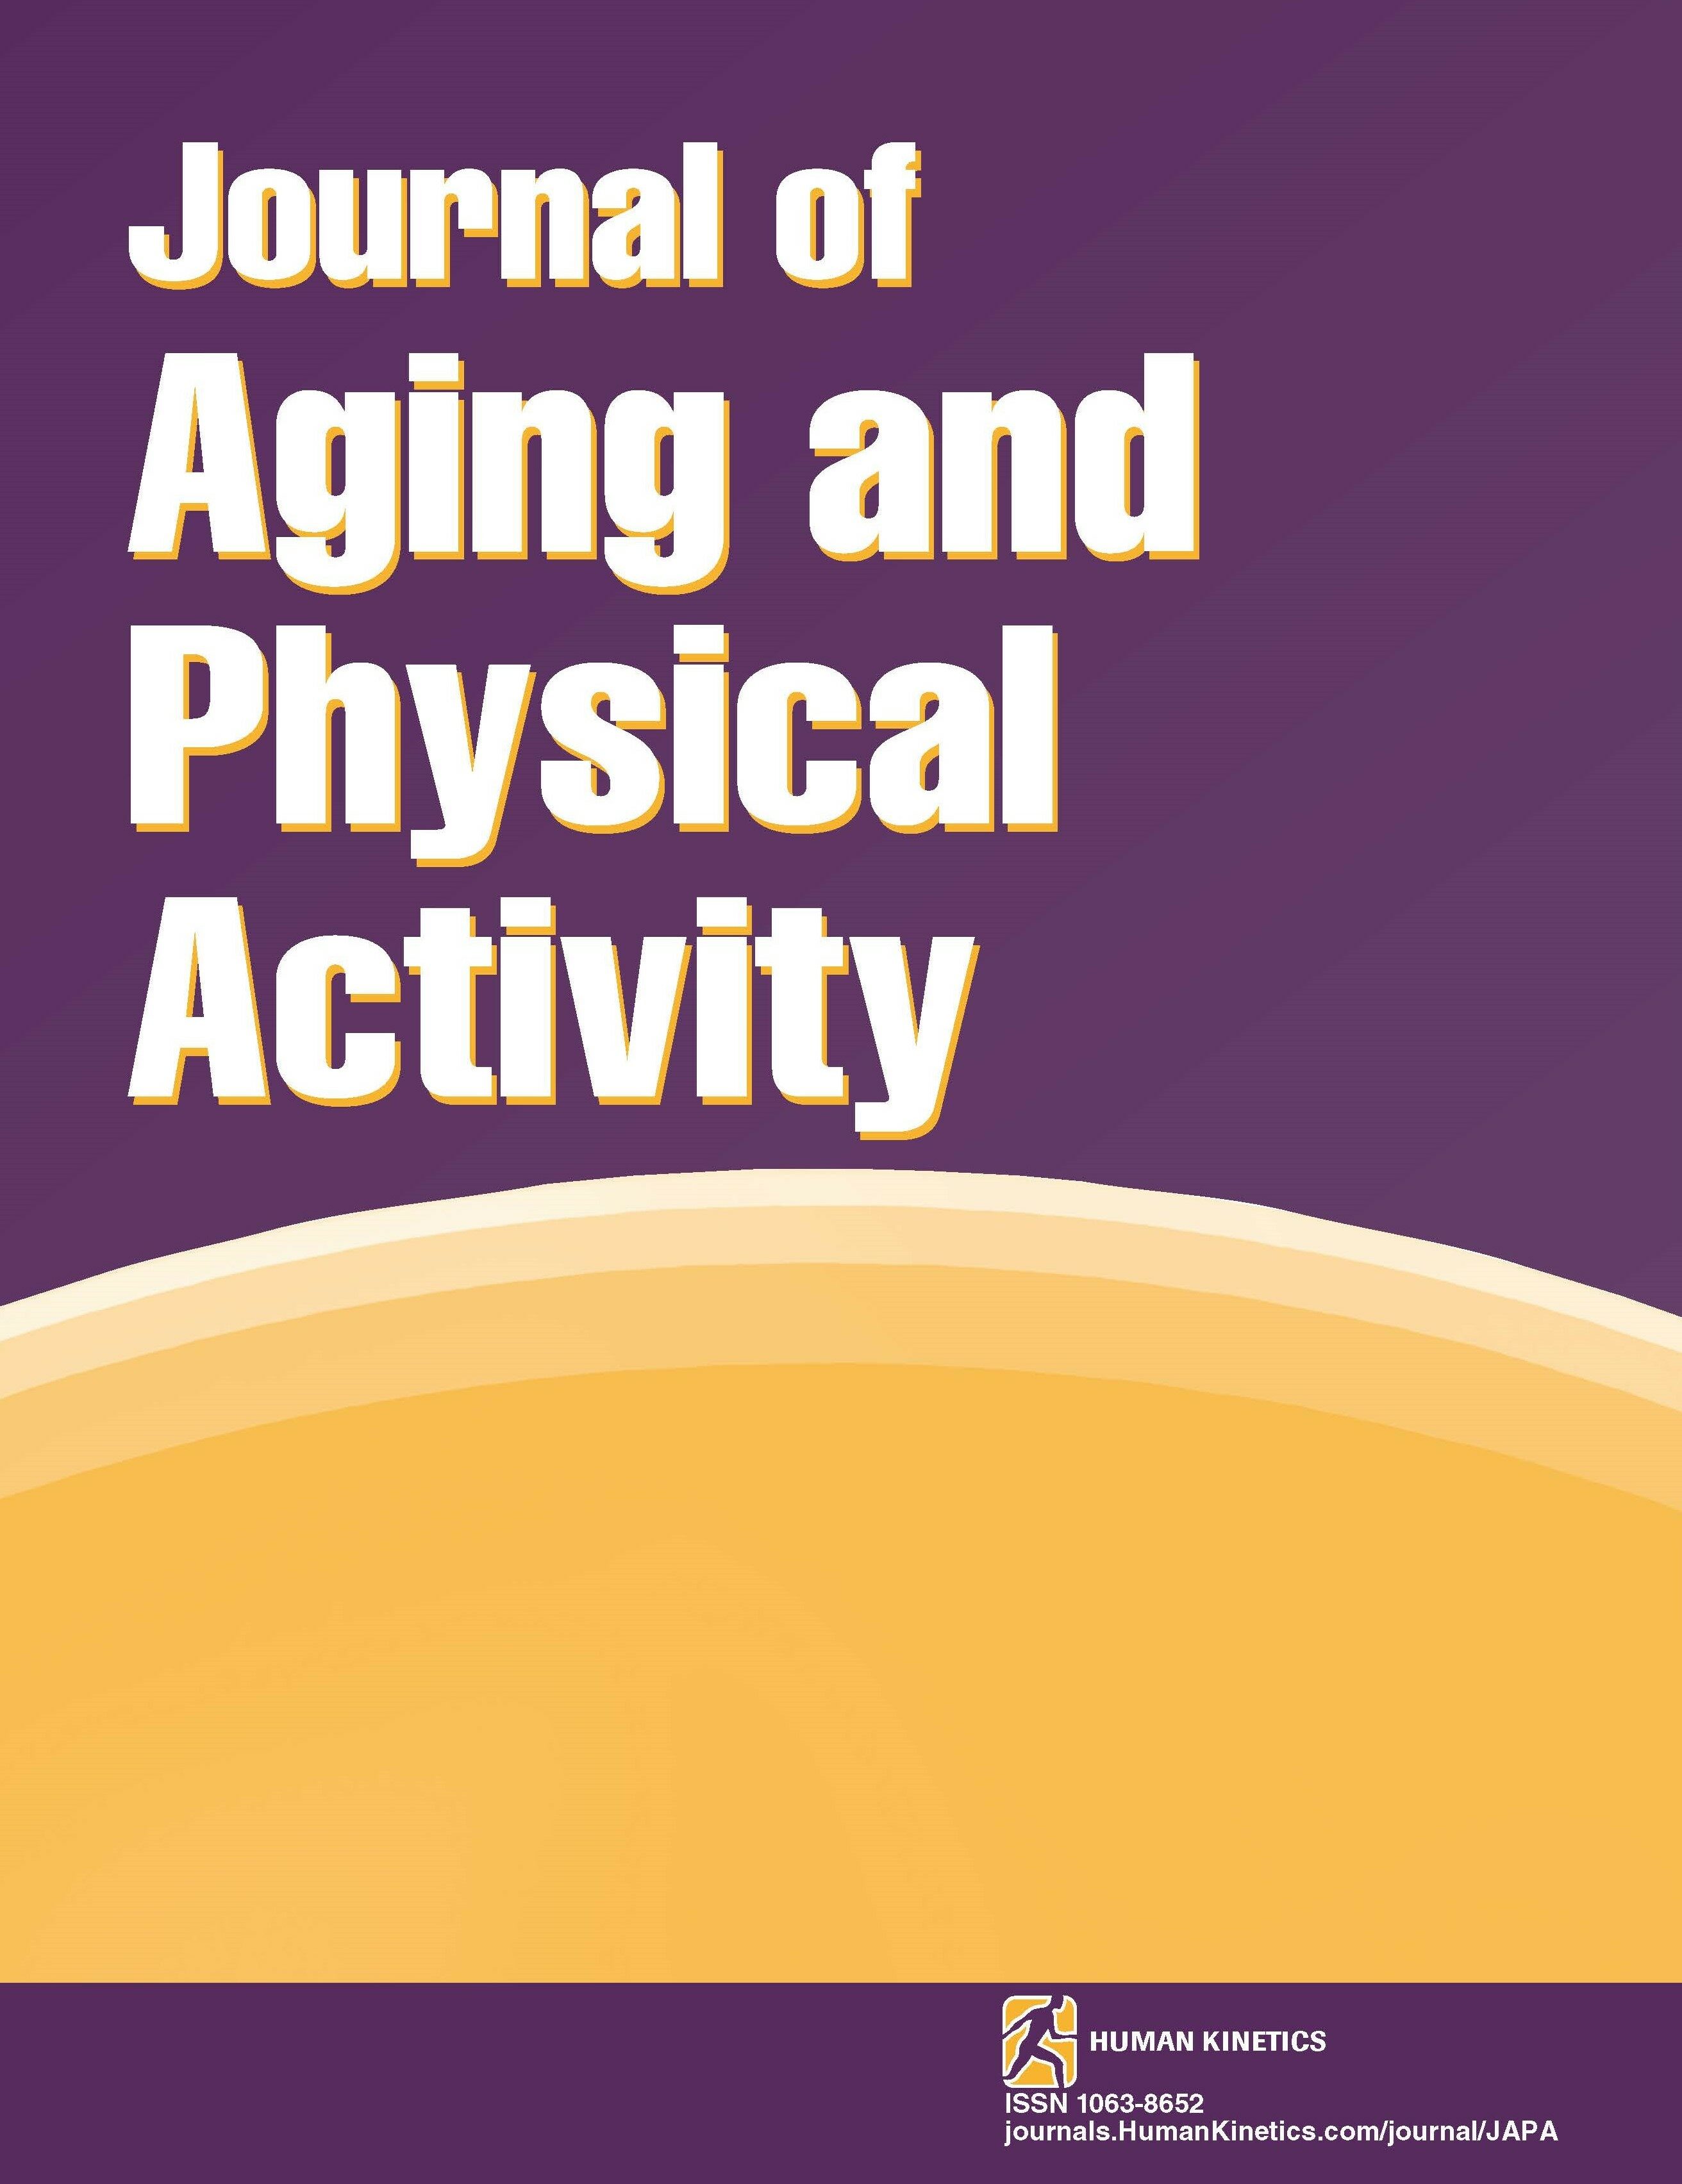 Exercise Intensity Among Older Adults Participating From Home in Remotely Delivered EnhanceFitness